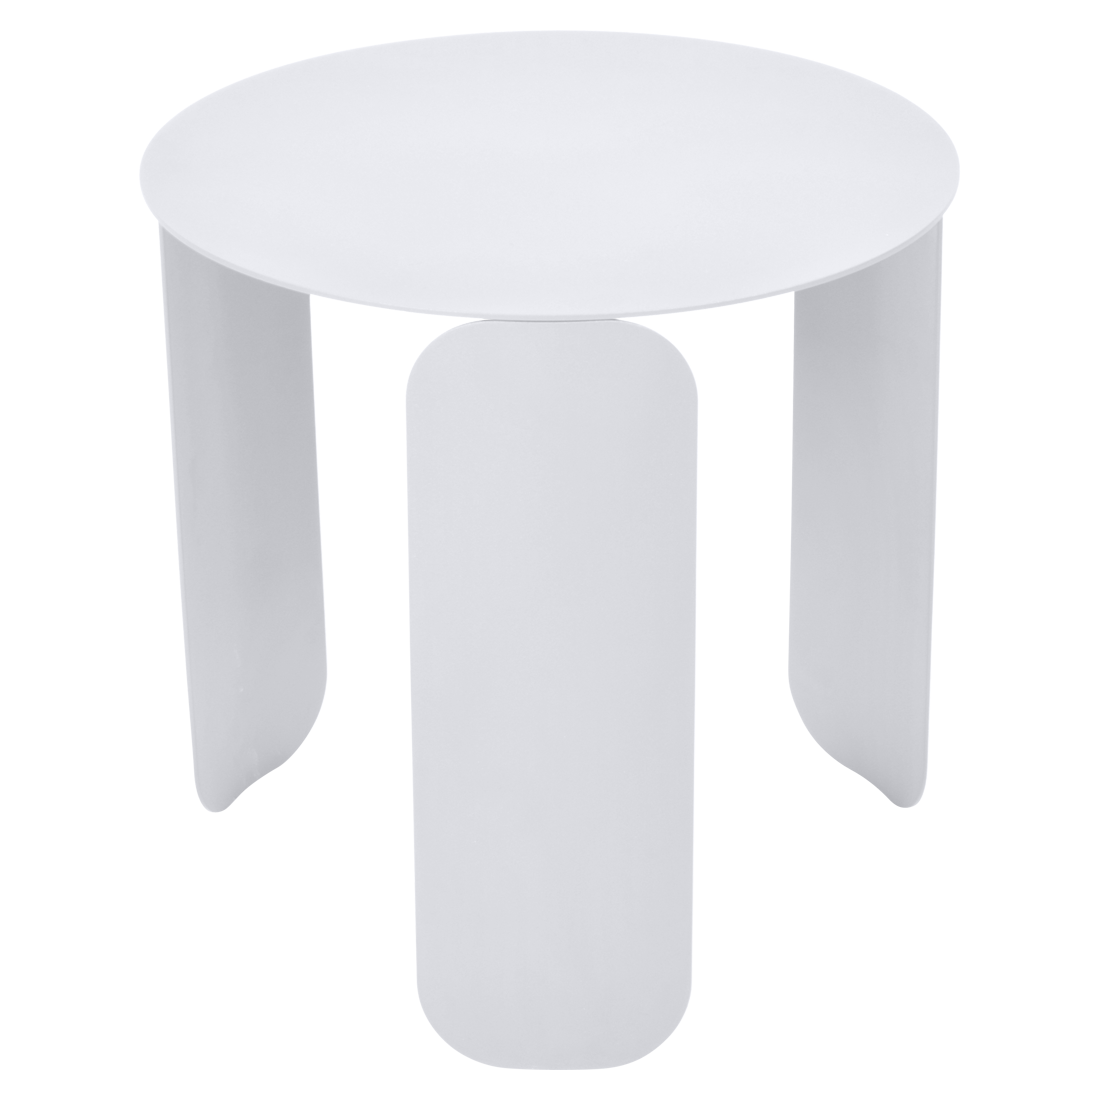 table basse design, table basse metal, table basse fermob, table basse blanche